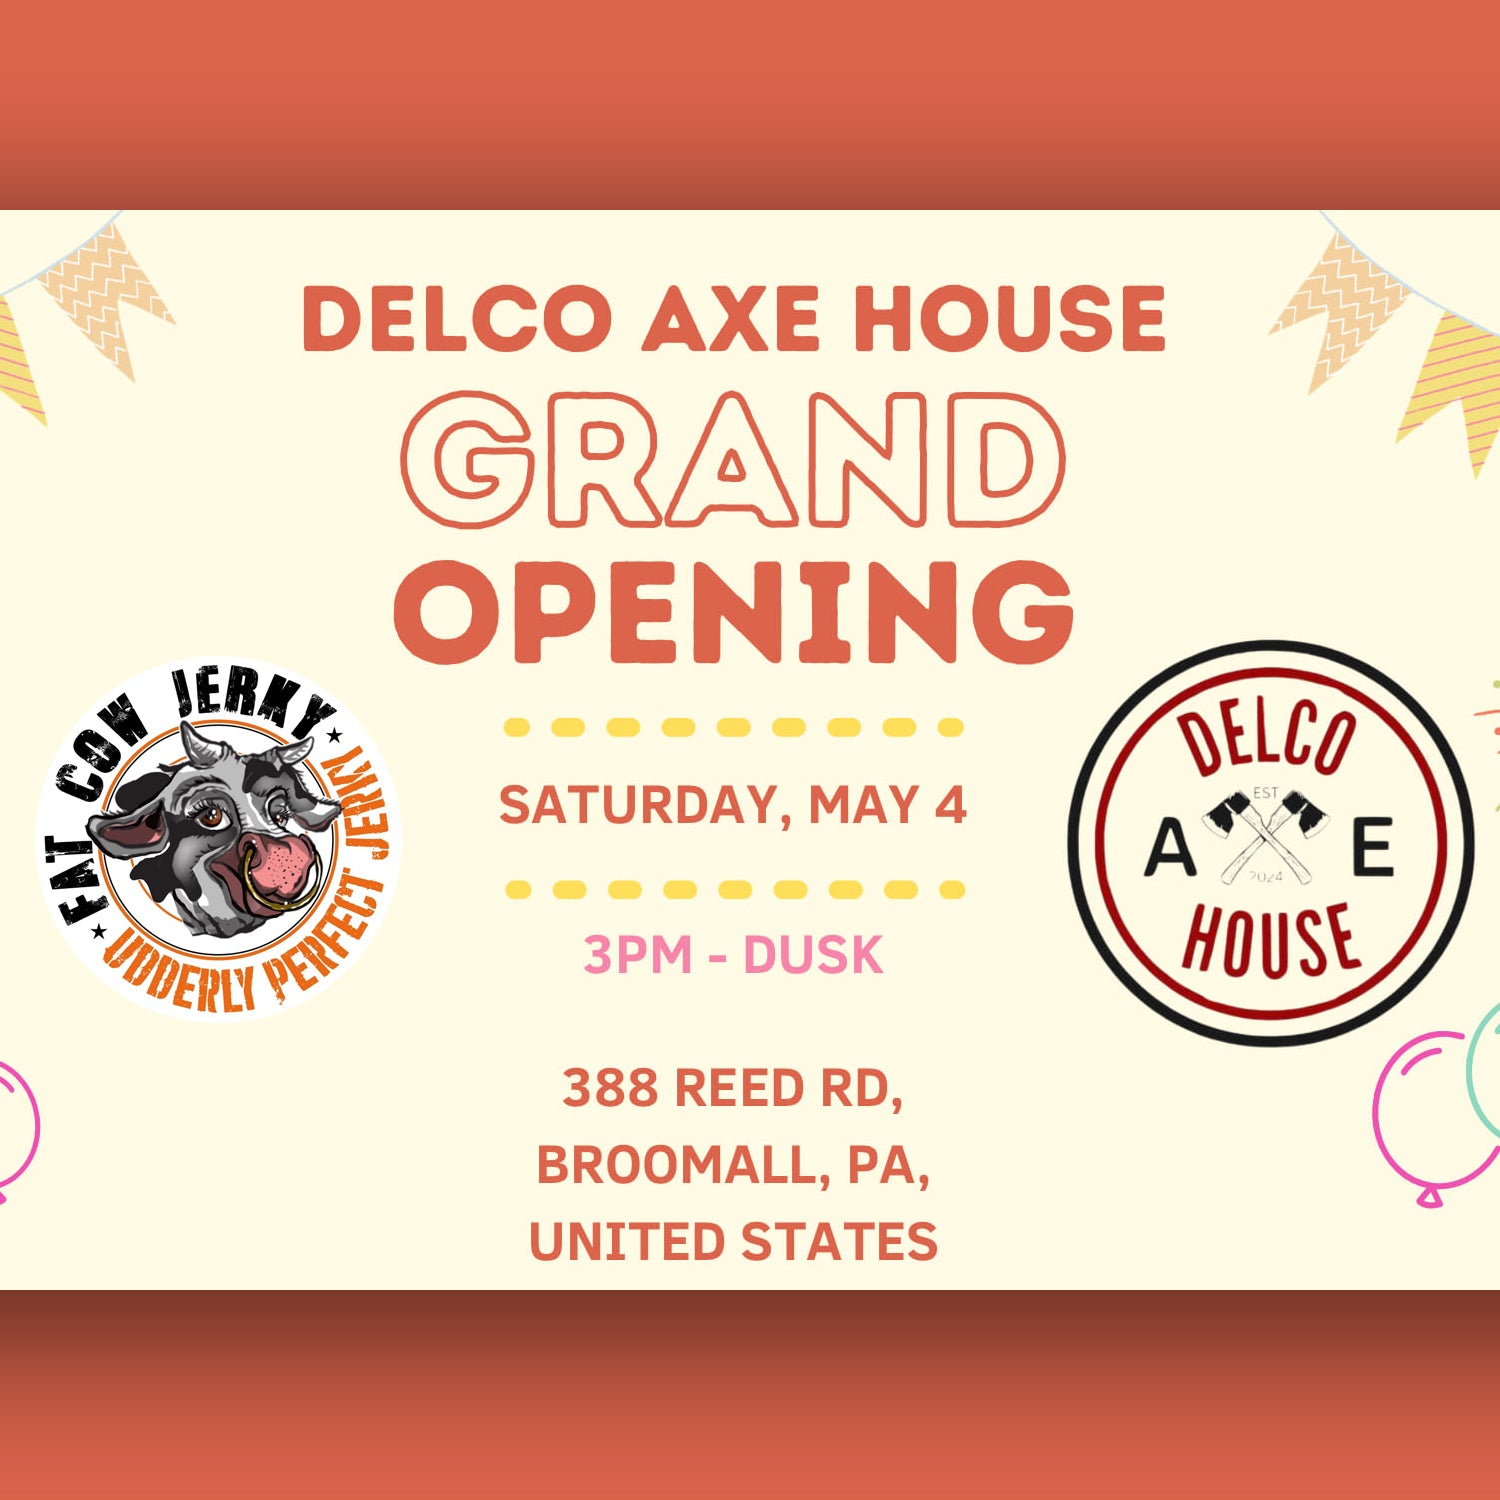 Delco Axe House Grand Opening - May 4.